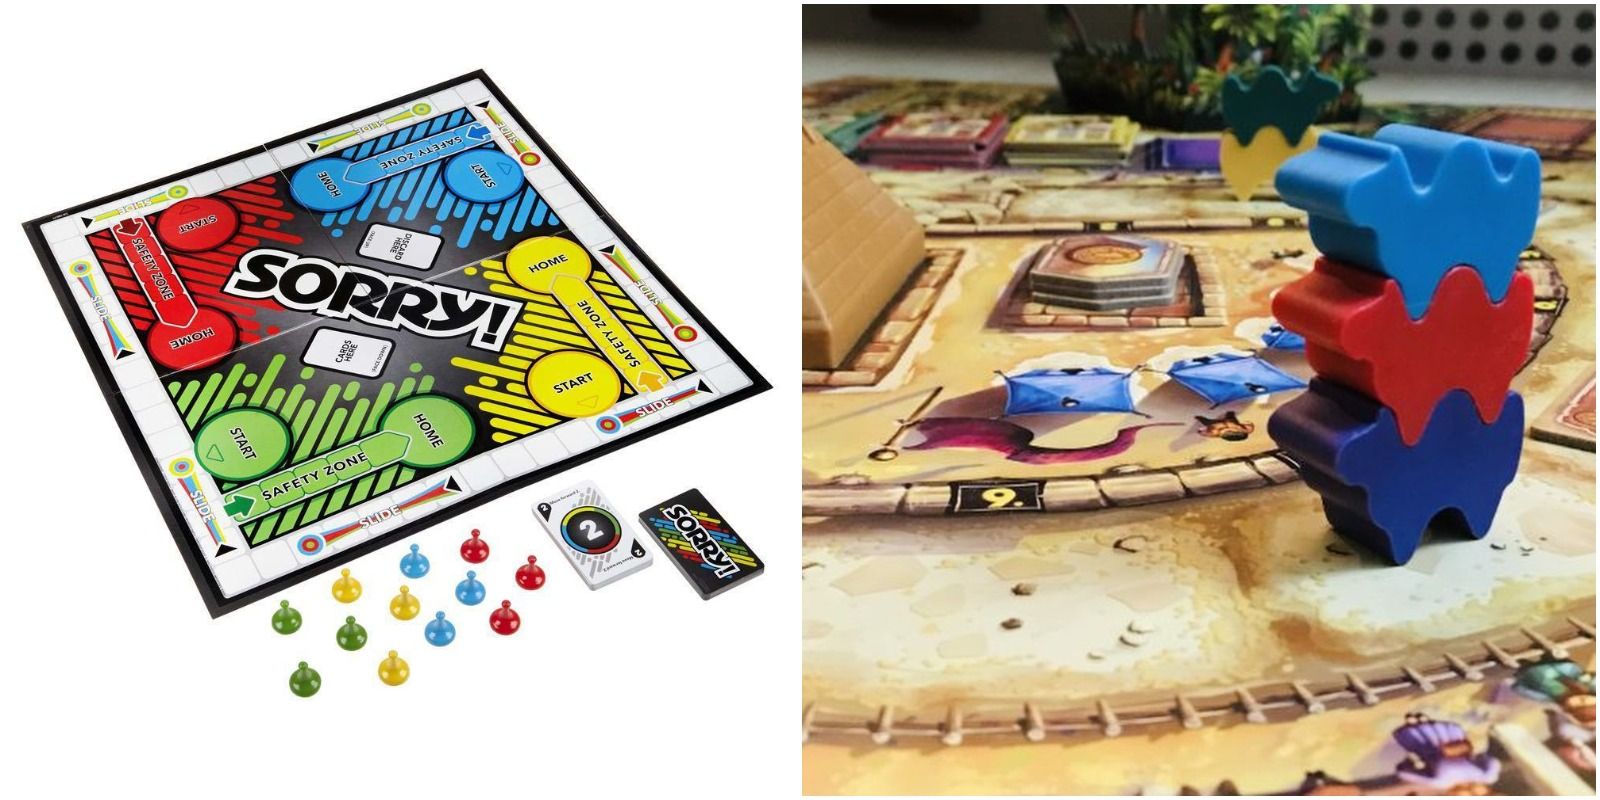 Sorry And Camel Up Board Game Being Played Components In Box